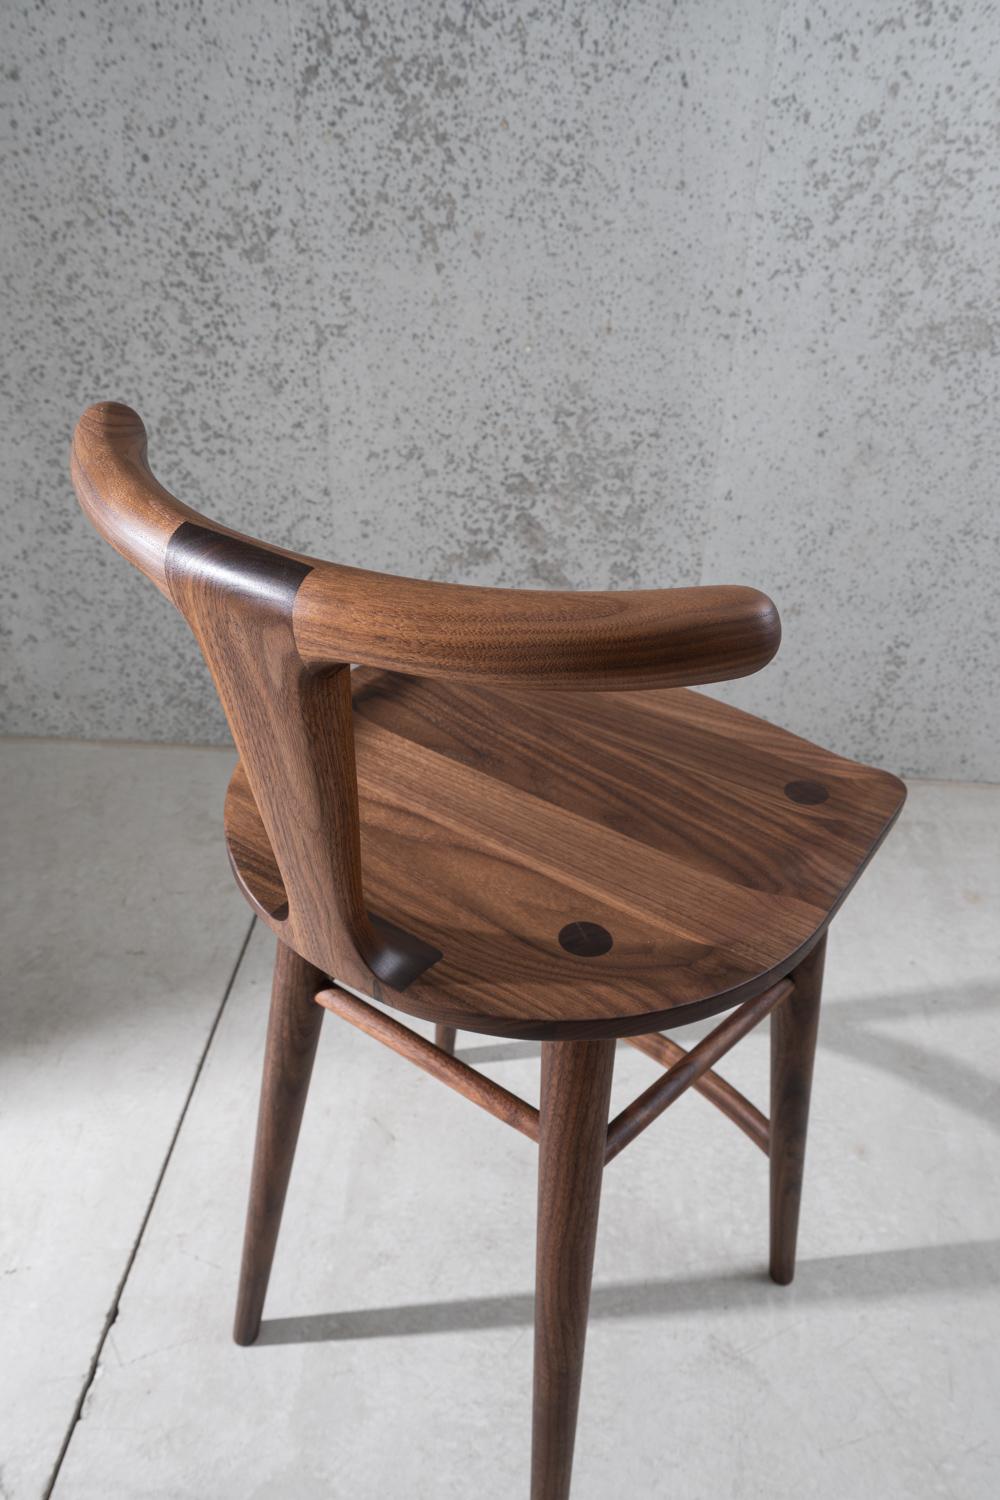 Hand-Crafted Oxbend Stool, Bar or Counter Seat in Walnut